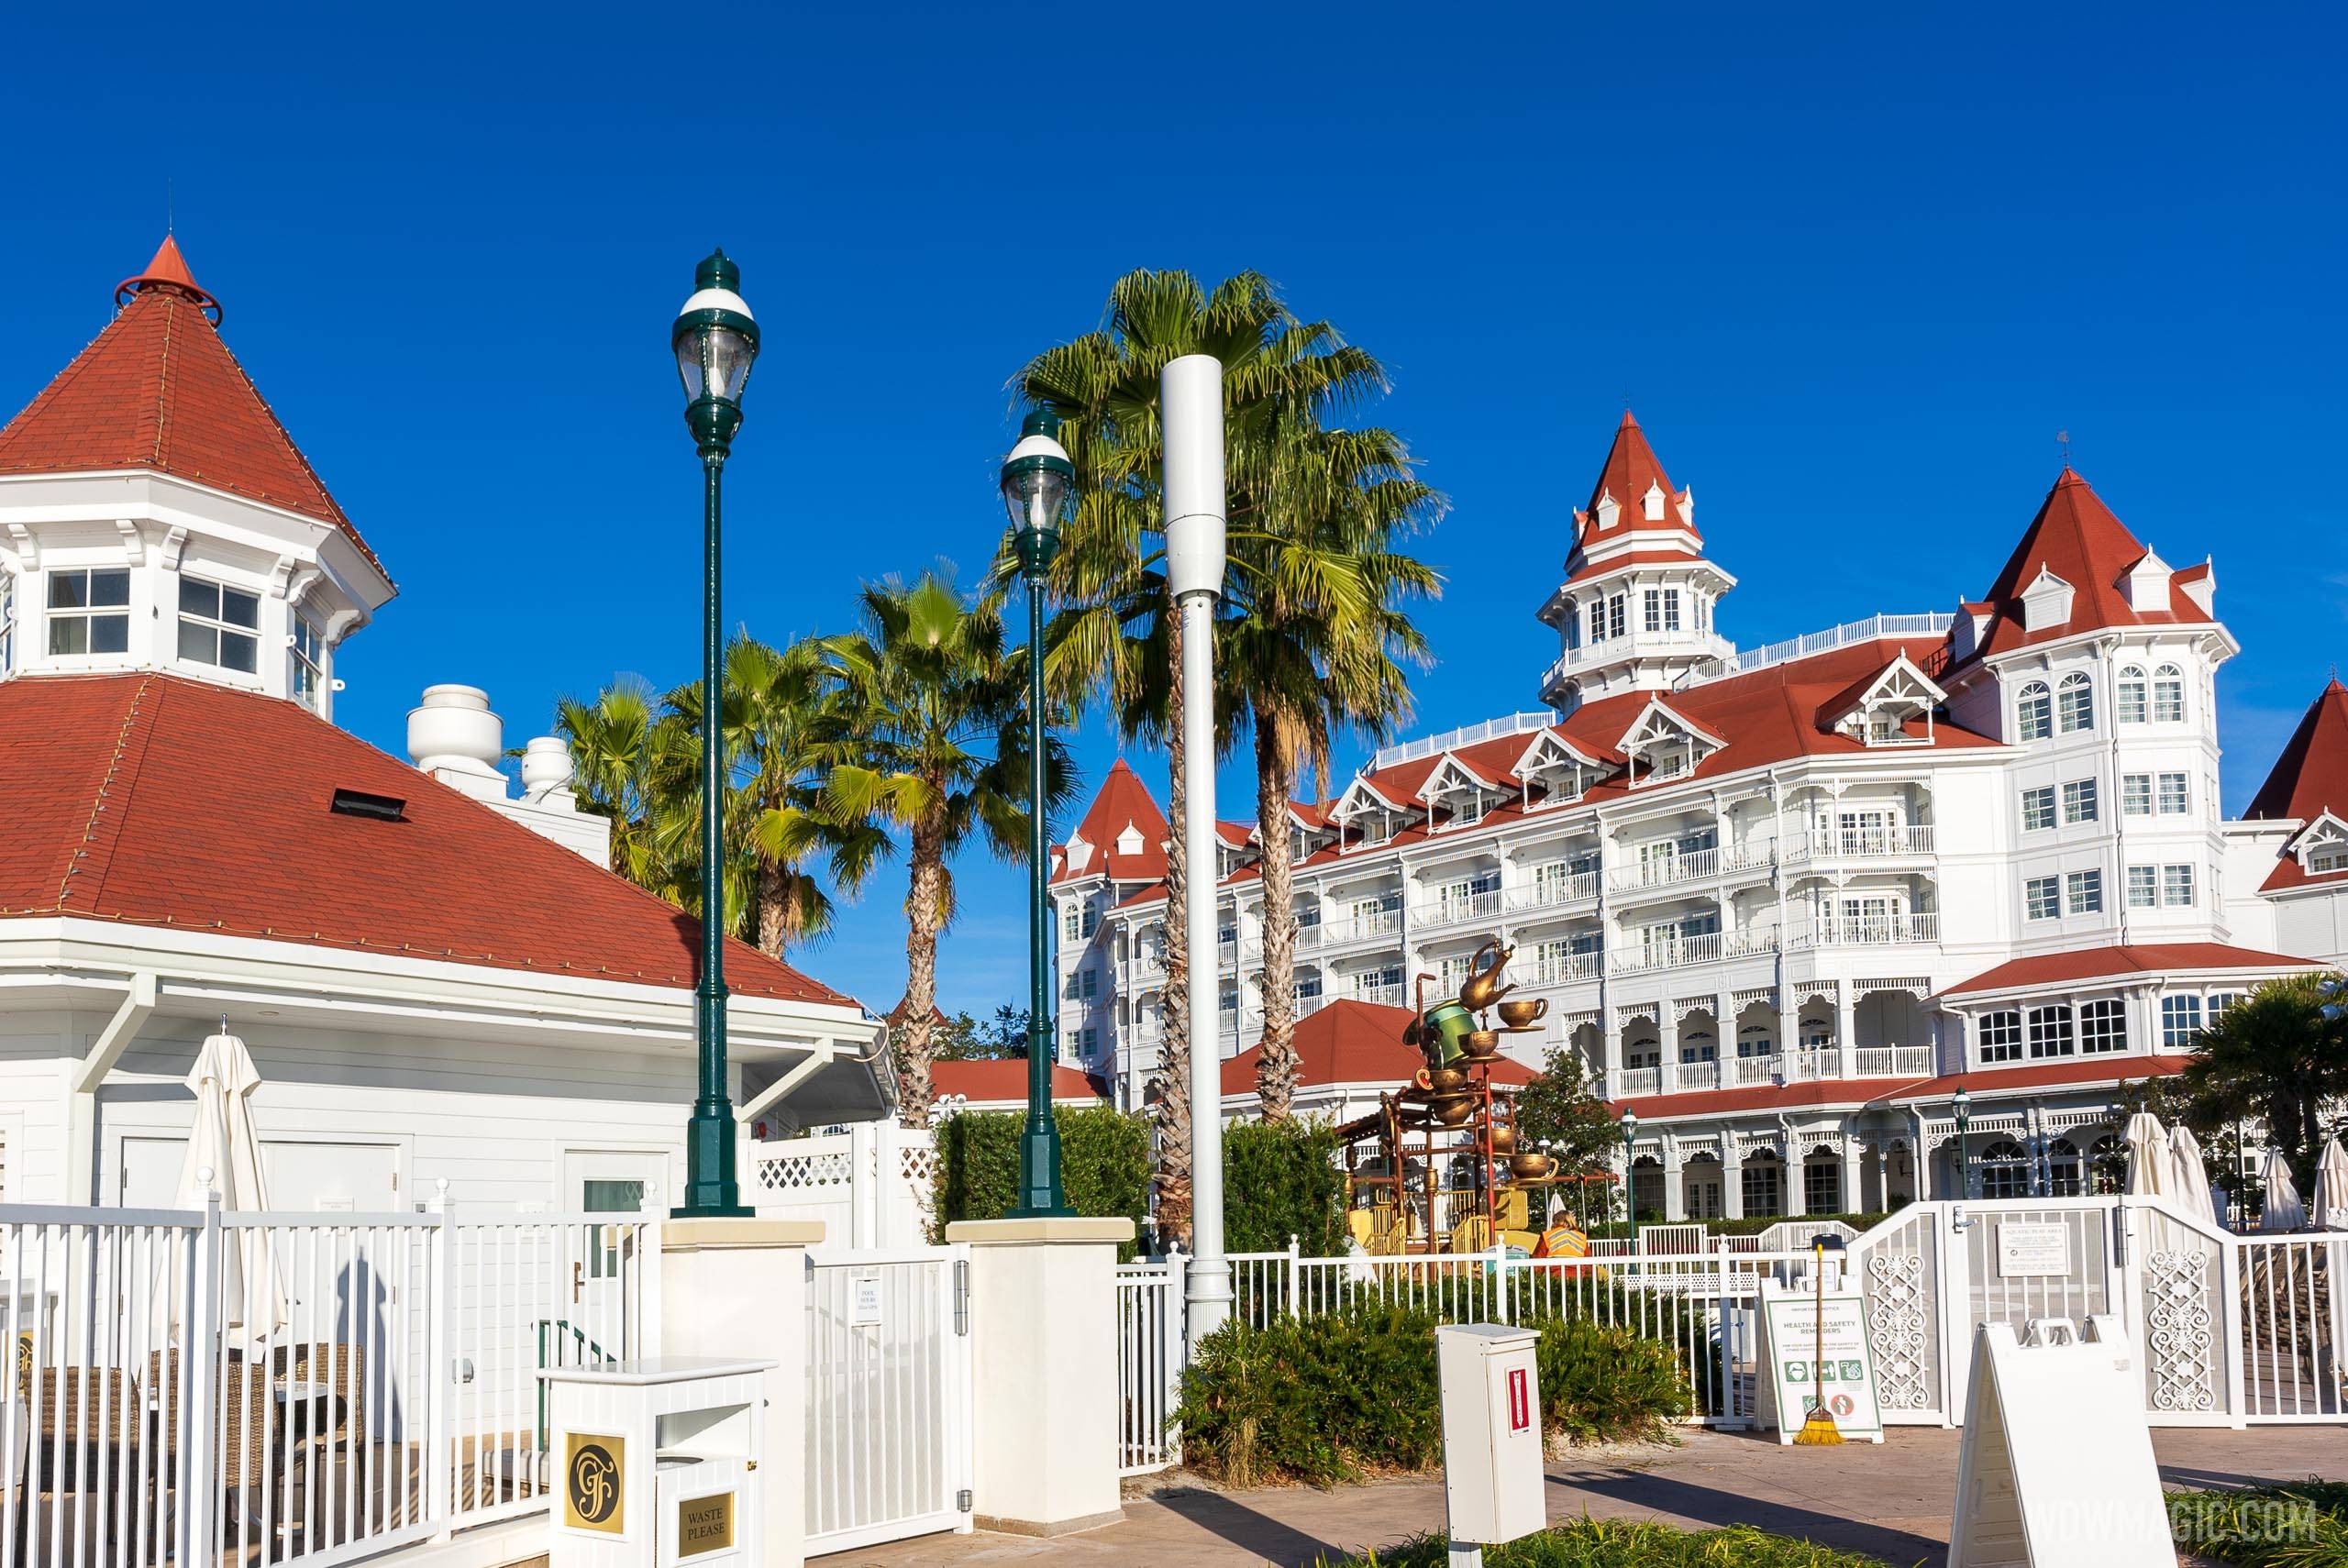 5G cell towers at Disney's Grand Floridian Resort